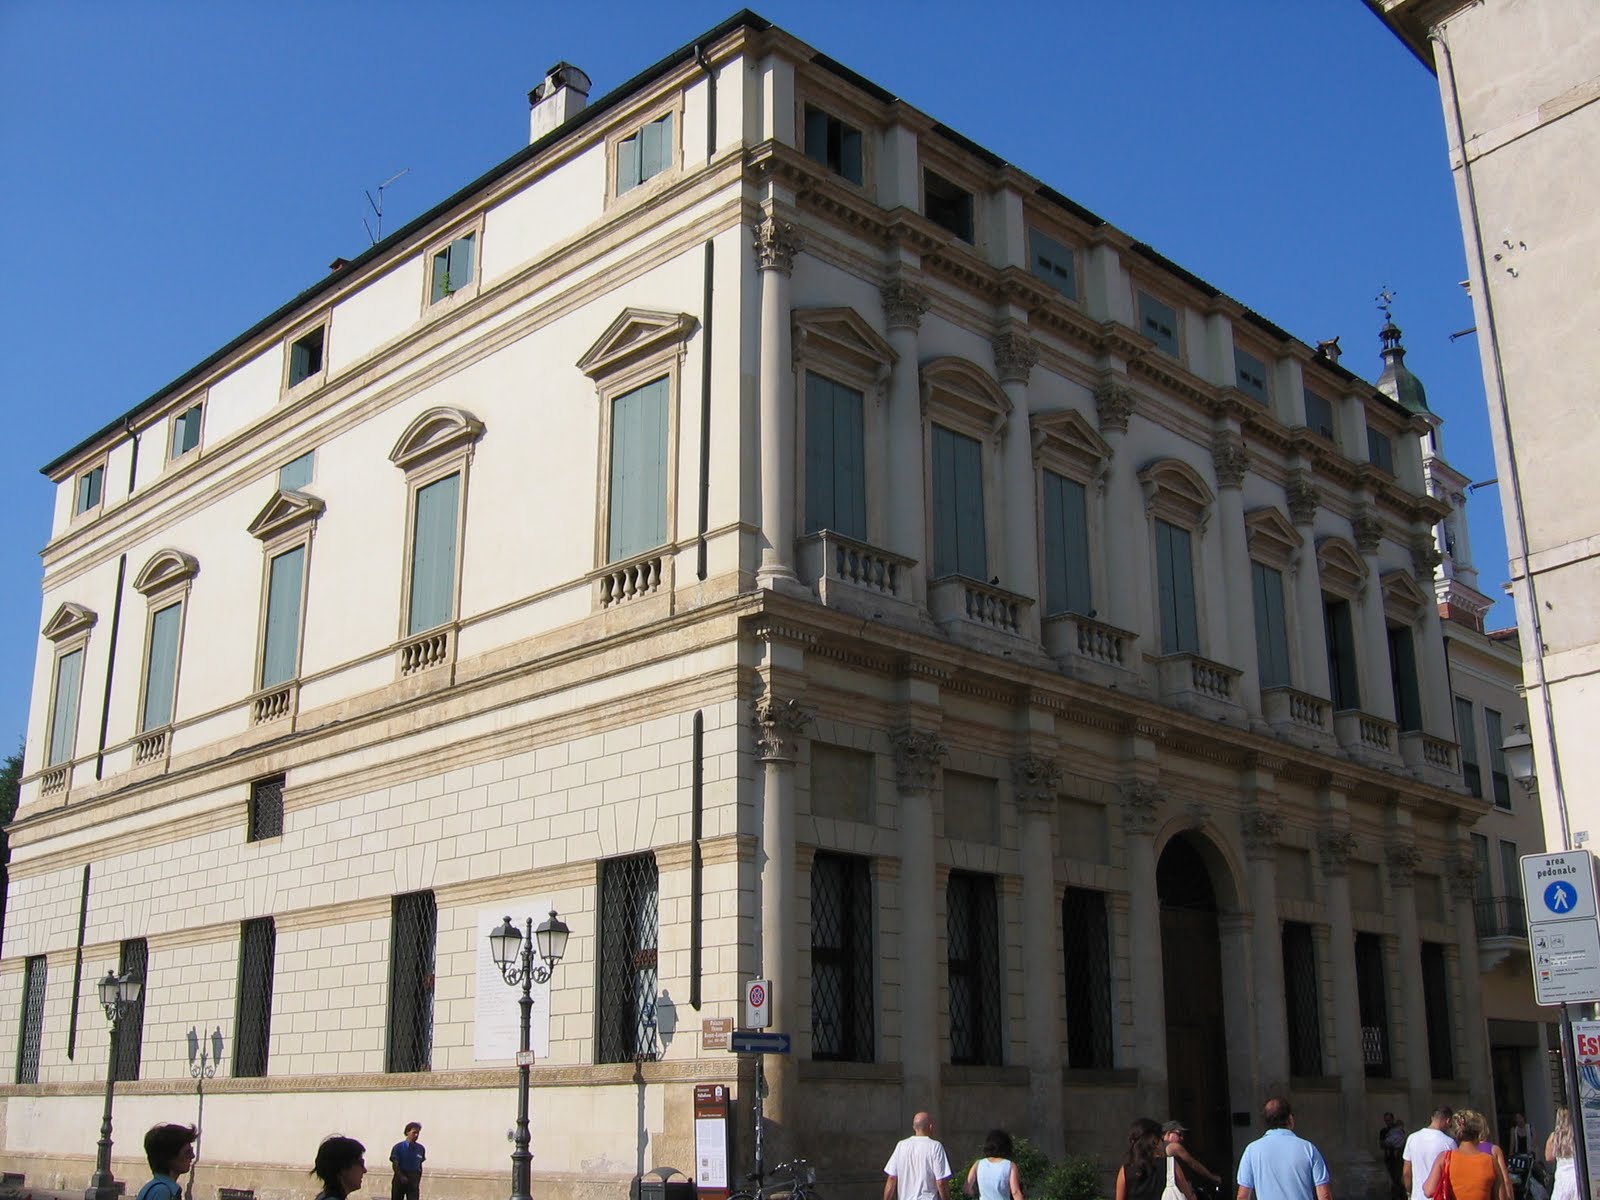 Lee's Tuscan Odyssey: Walking with my favourite Architect, Palladio